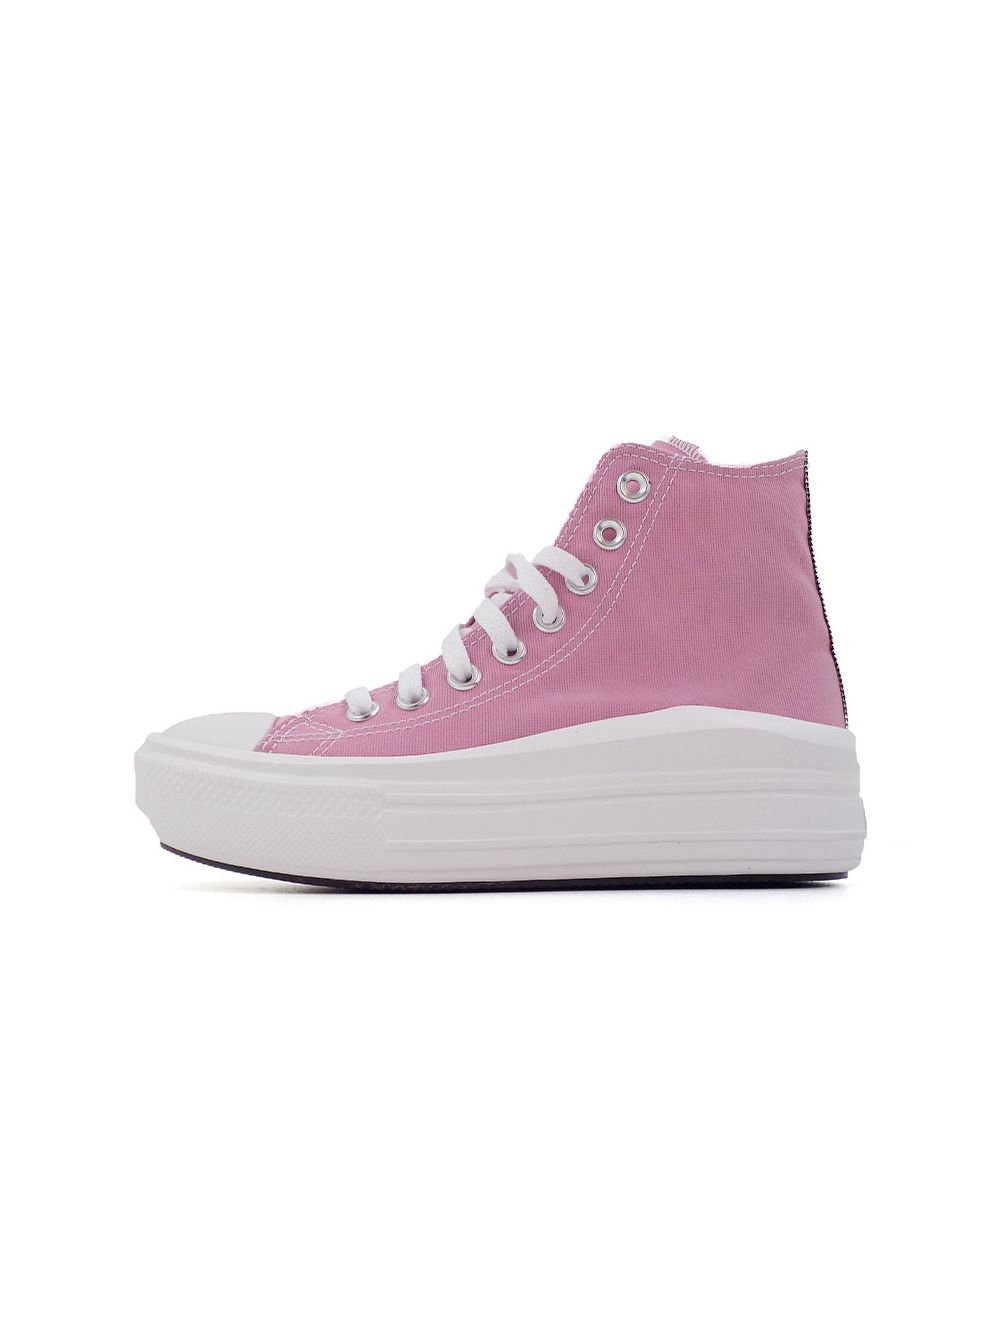 Converse All Star Move Platform Youth Lotus Pink White